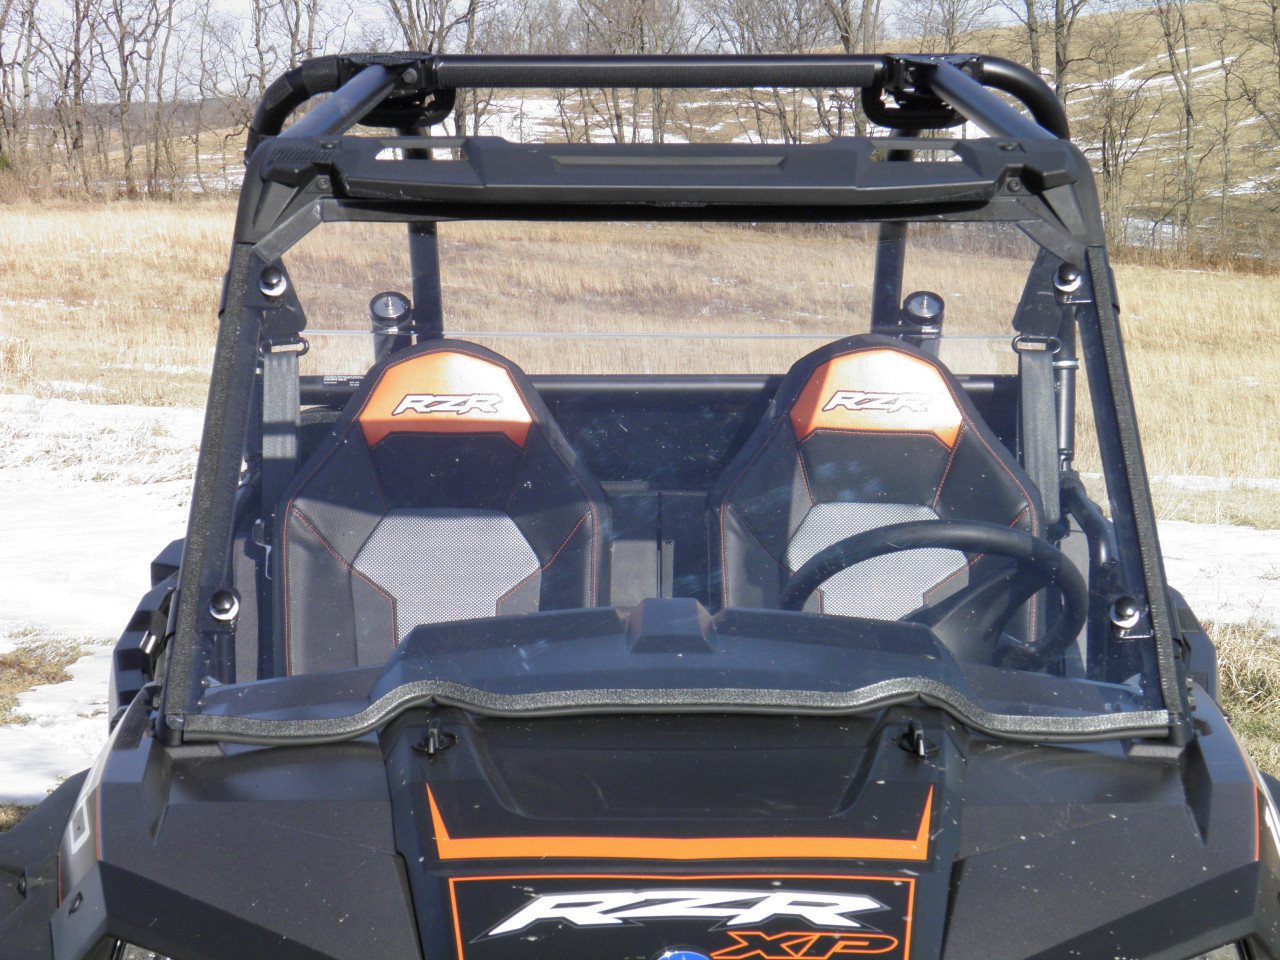 3 Star side x side accessories Polaris RZR XP1000/XP Turbo/S1000 windshield front view